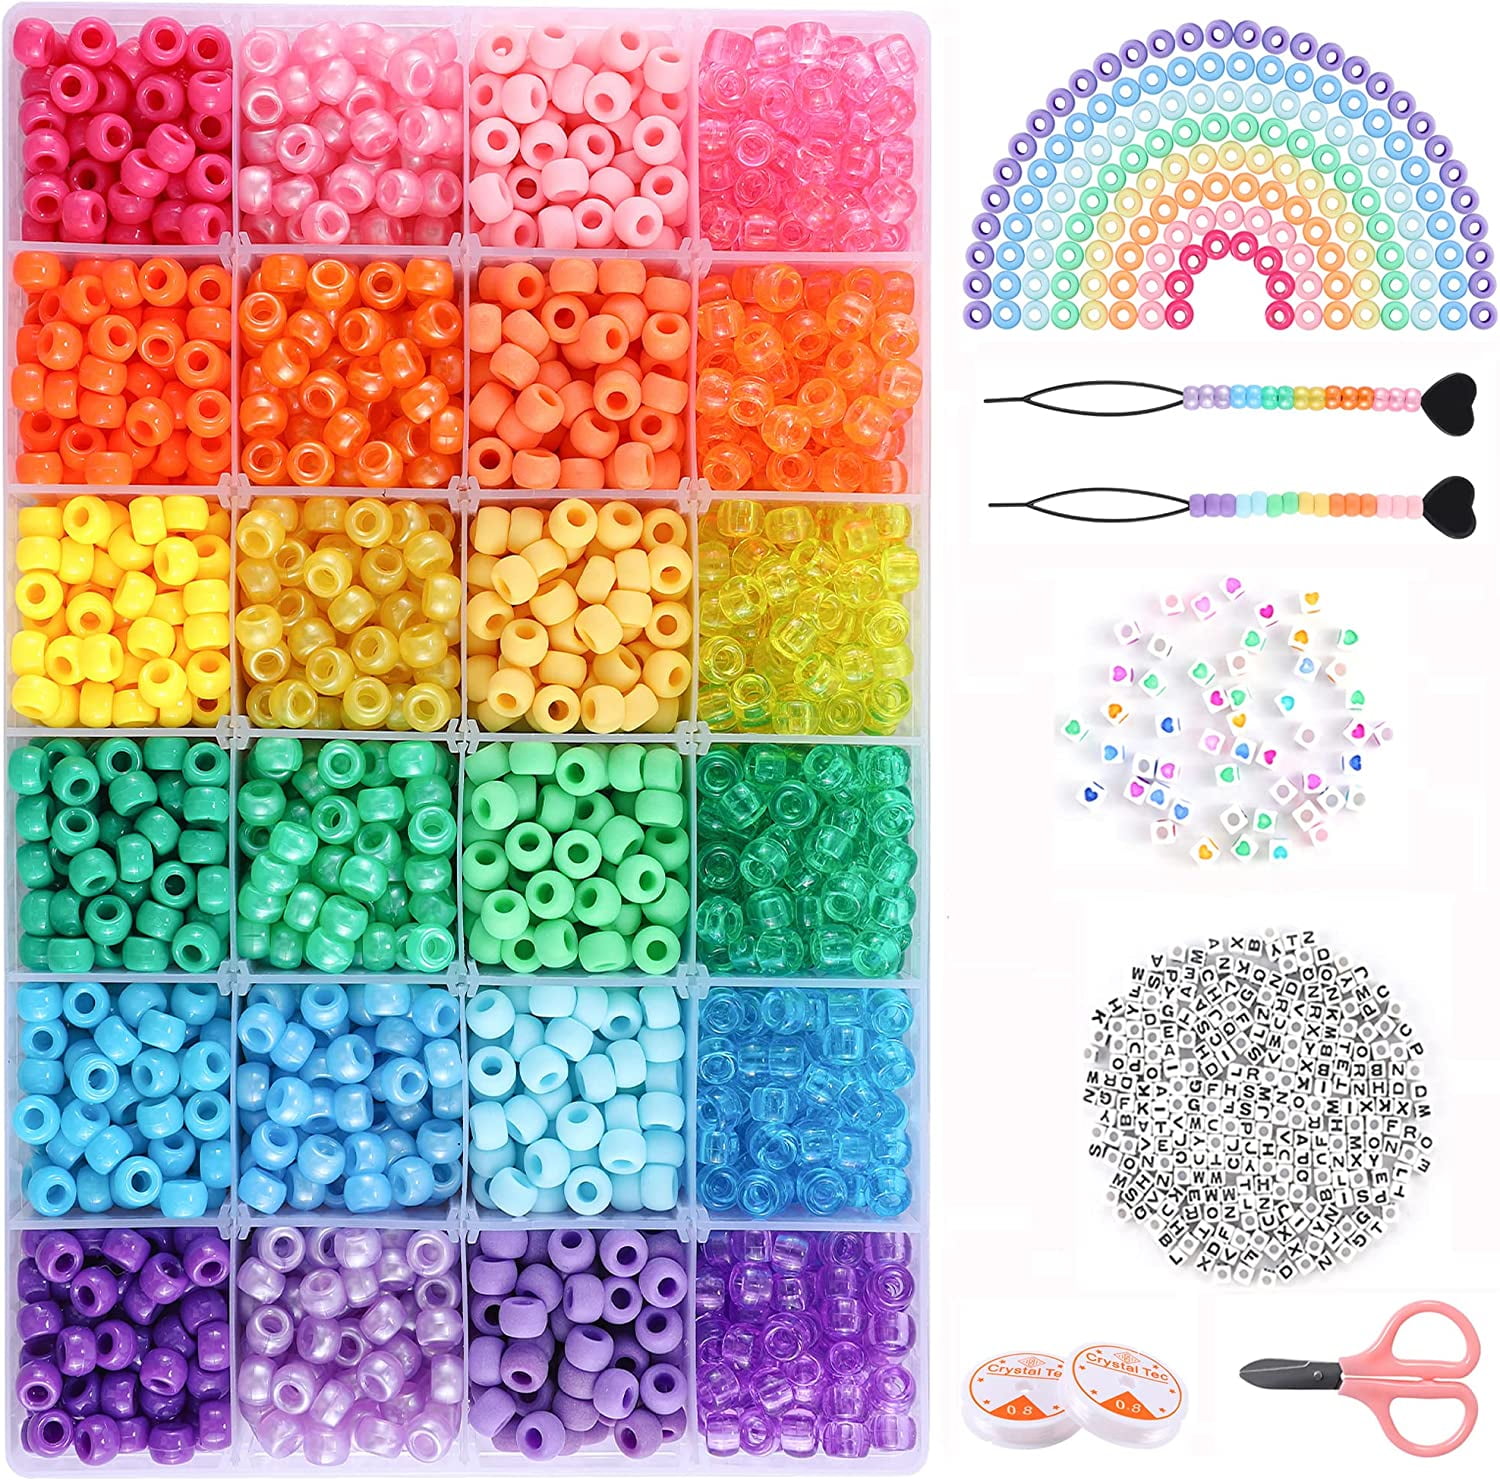 DoreenBow 1000PCS Letter Beads Bracelet Making Kit Alphabet Beads Craft  Pony Beads for DIY Jewelry Making Supplies with Elastic Crystal String Cord  : Amazon.in: Home & Kitchen